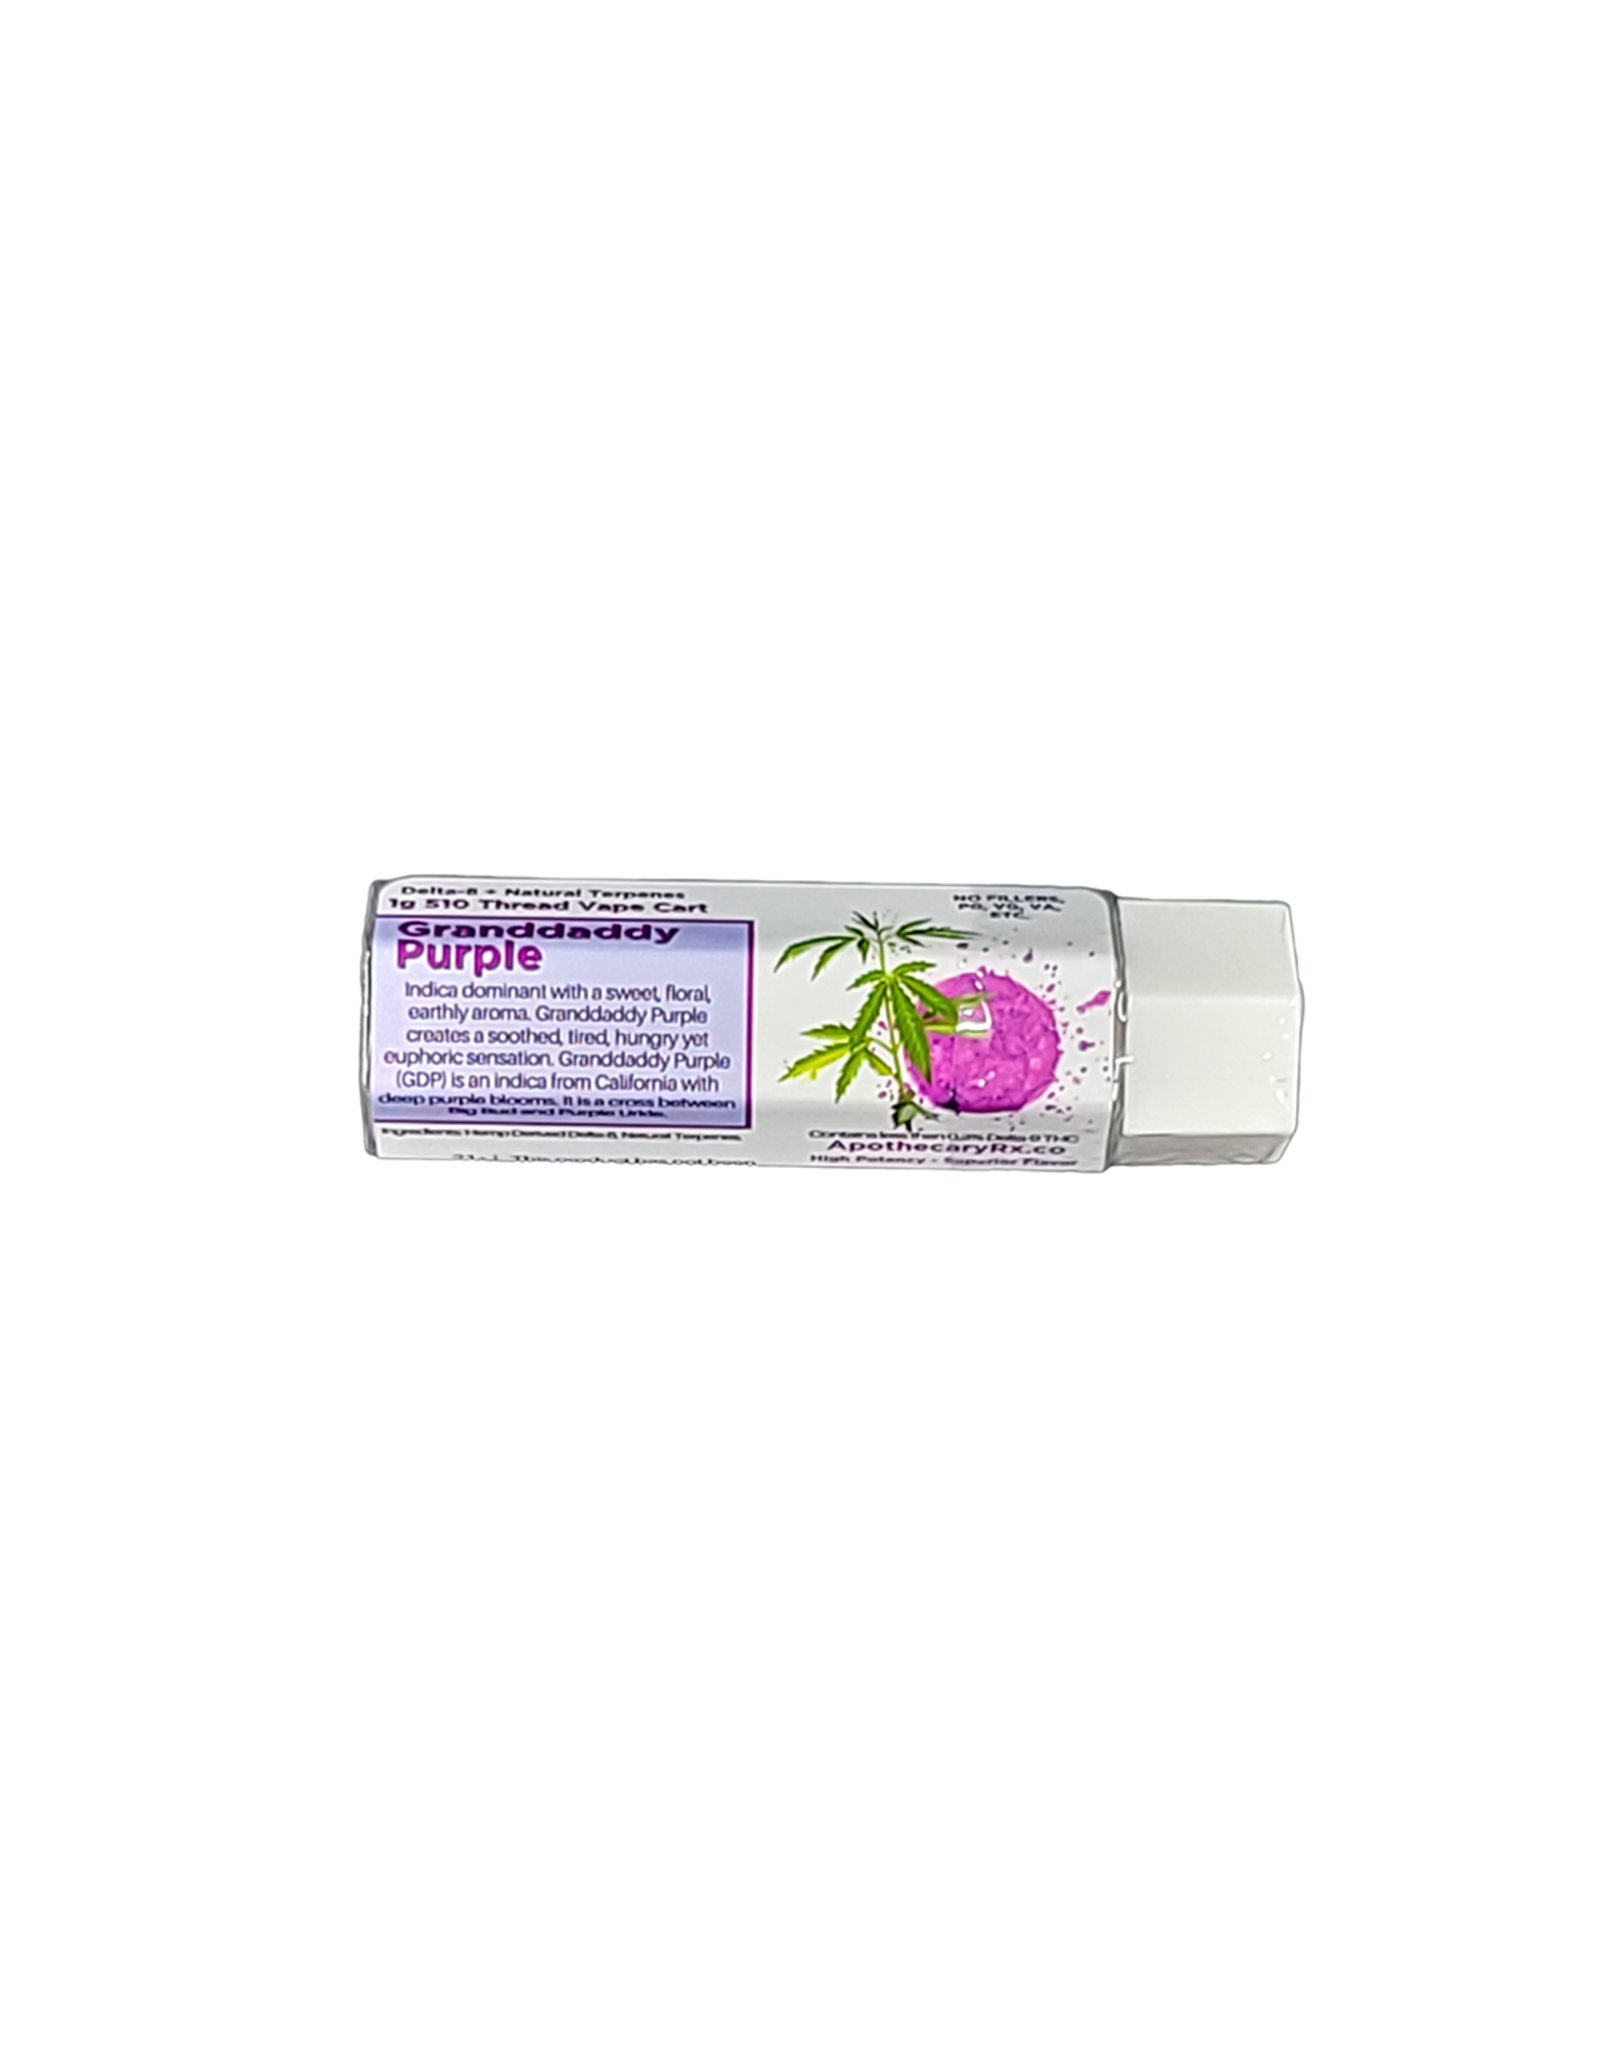 Apothecary Rx Apothecary Rx Delta 8 Granddaddy Purple  Cartridge 1gr